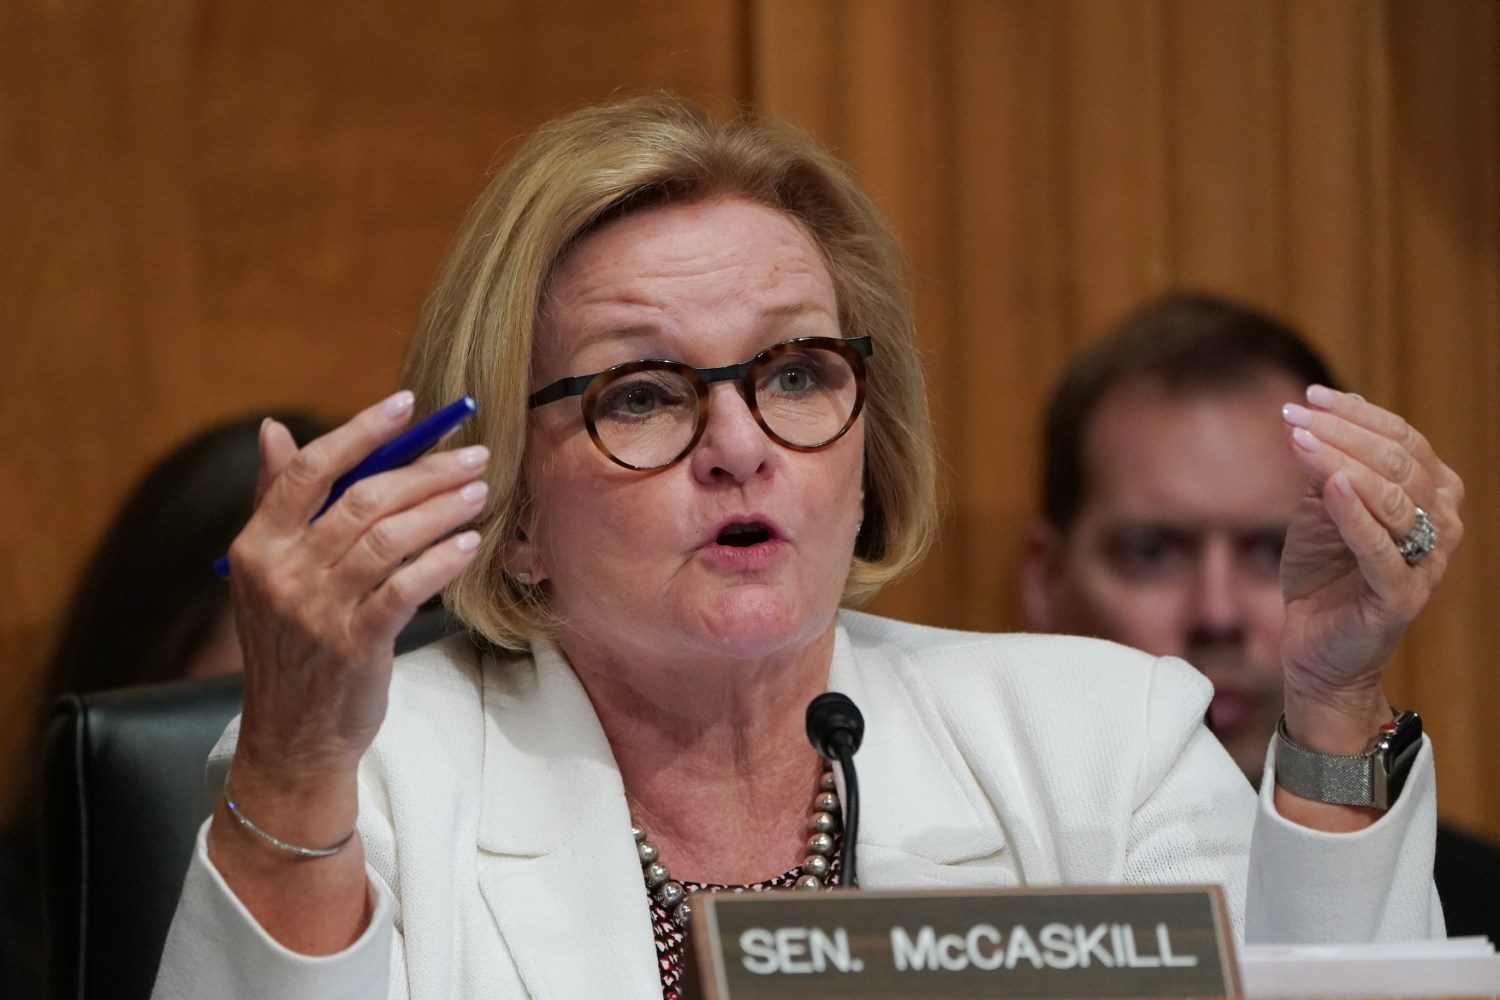 Senate Homeland Security and Governmental Affairs Committee ranking member Claire McCaskill (D-MO) questions Department of Homeland Security Secretary Kirstjen Nielsen during a Senate Homeland Security and Governmental Affairs Committee hearing on "Authorities and Resources Needed to Protect and Secure the United States,"  on Capitol Hill in Washington, DC, U.S., May 15, 2018. REUTERS/Erin Schaff - HP1EE5F1KUG2A